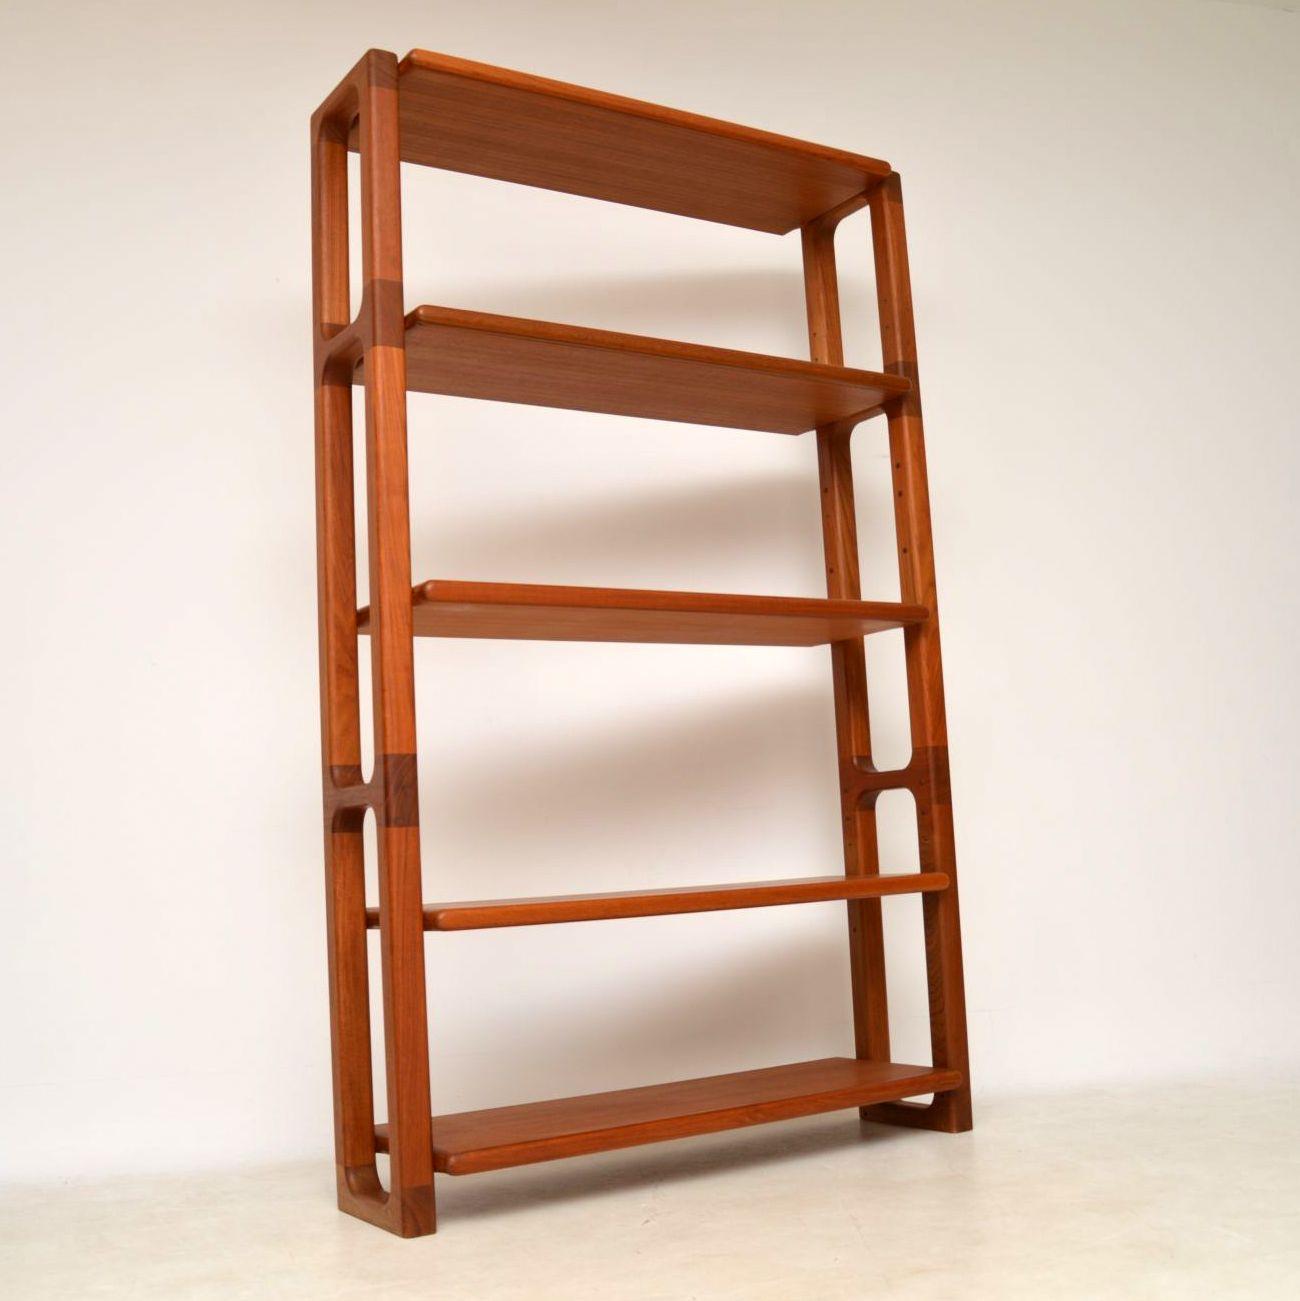 A smart, very large and extremely well made vintage bookcase in teak, this was made in Denmark by Dyrlund, it dates from the 1960s-1970s. The quality is amazing, and it’s in great condition for its age. This can be dismantled and flat packed, the